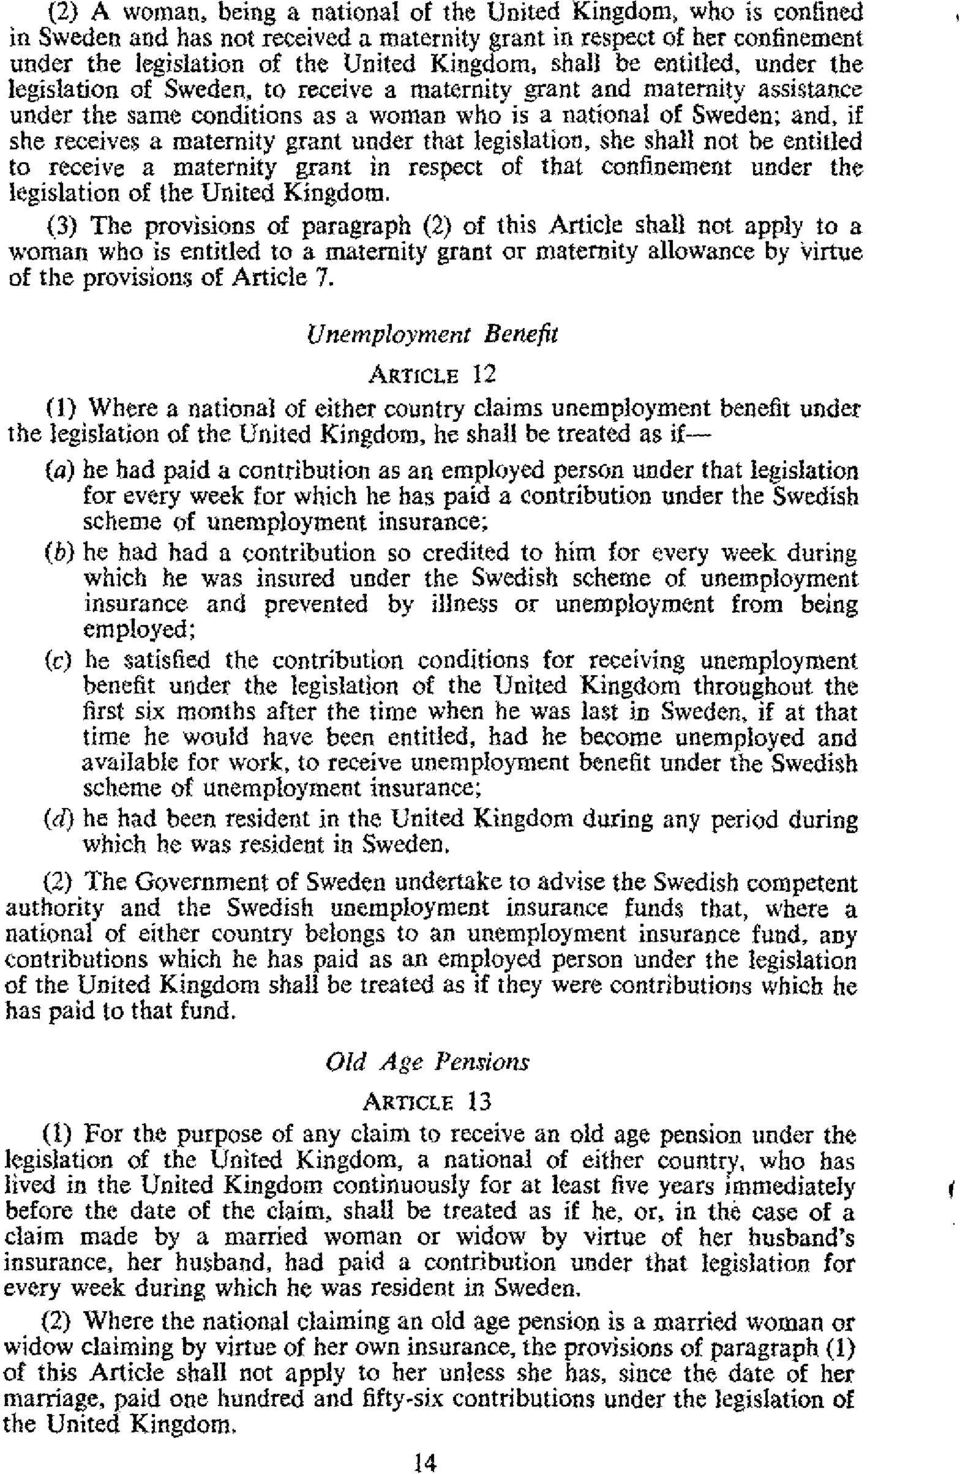 grant under that legislation, she shall not be entitled to receive a maternity grant in respect of that confinement under the legislation of the United Kingdom.